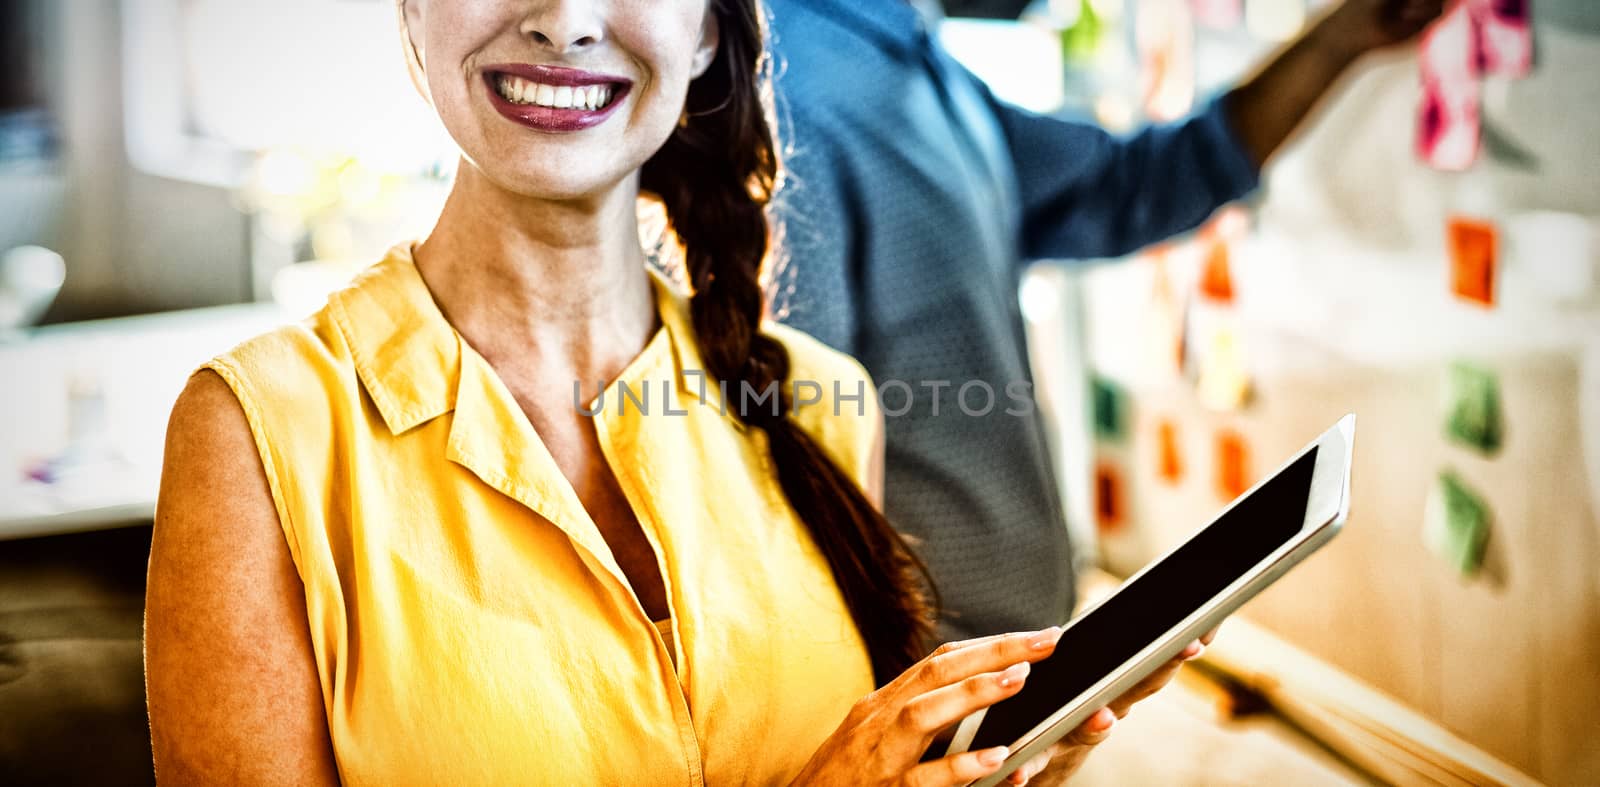 Female business executive holding digital tablet in office